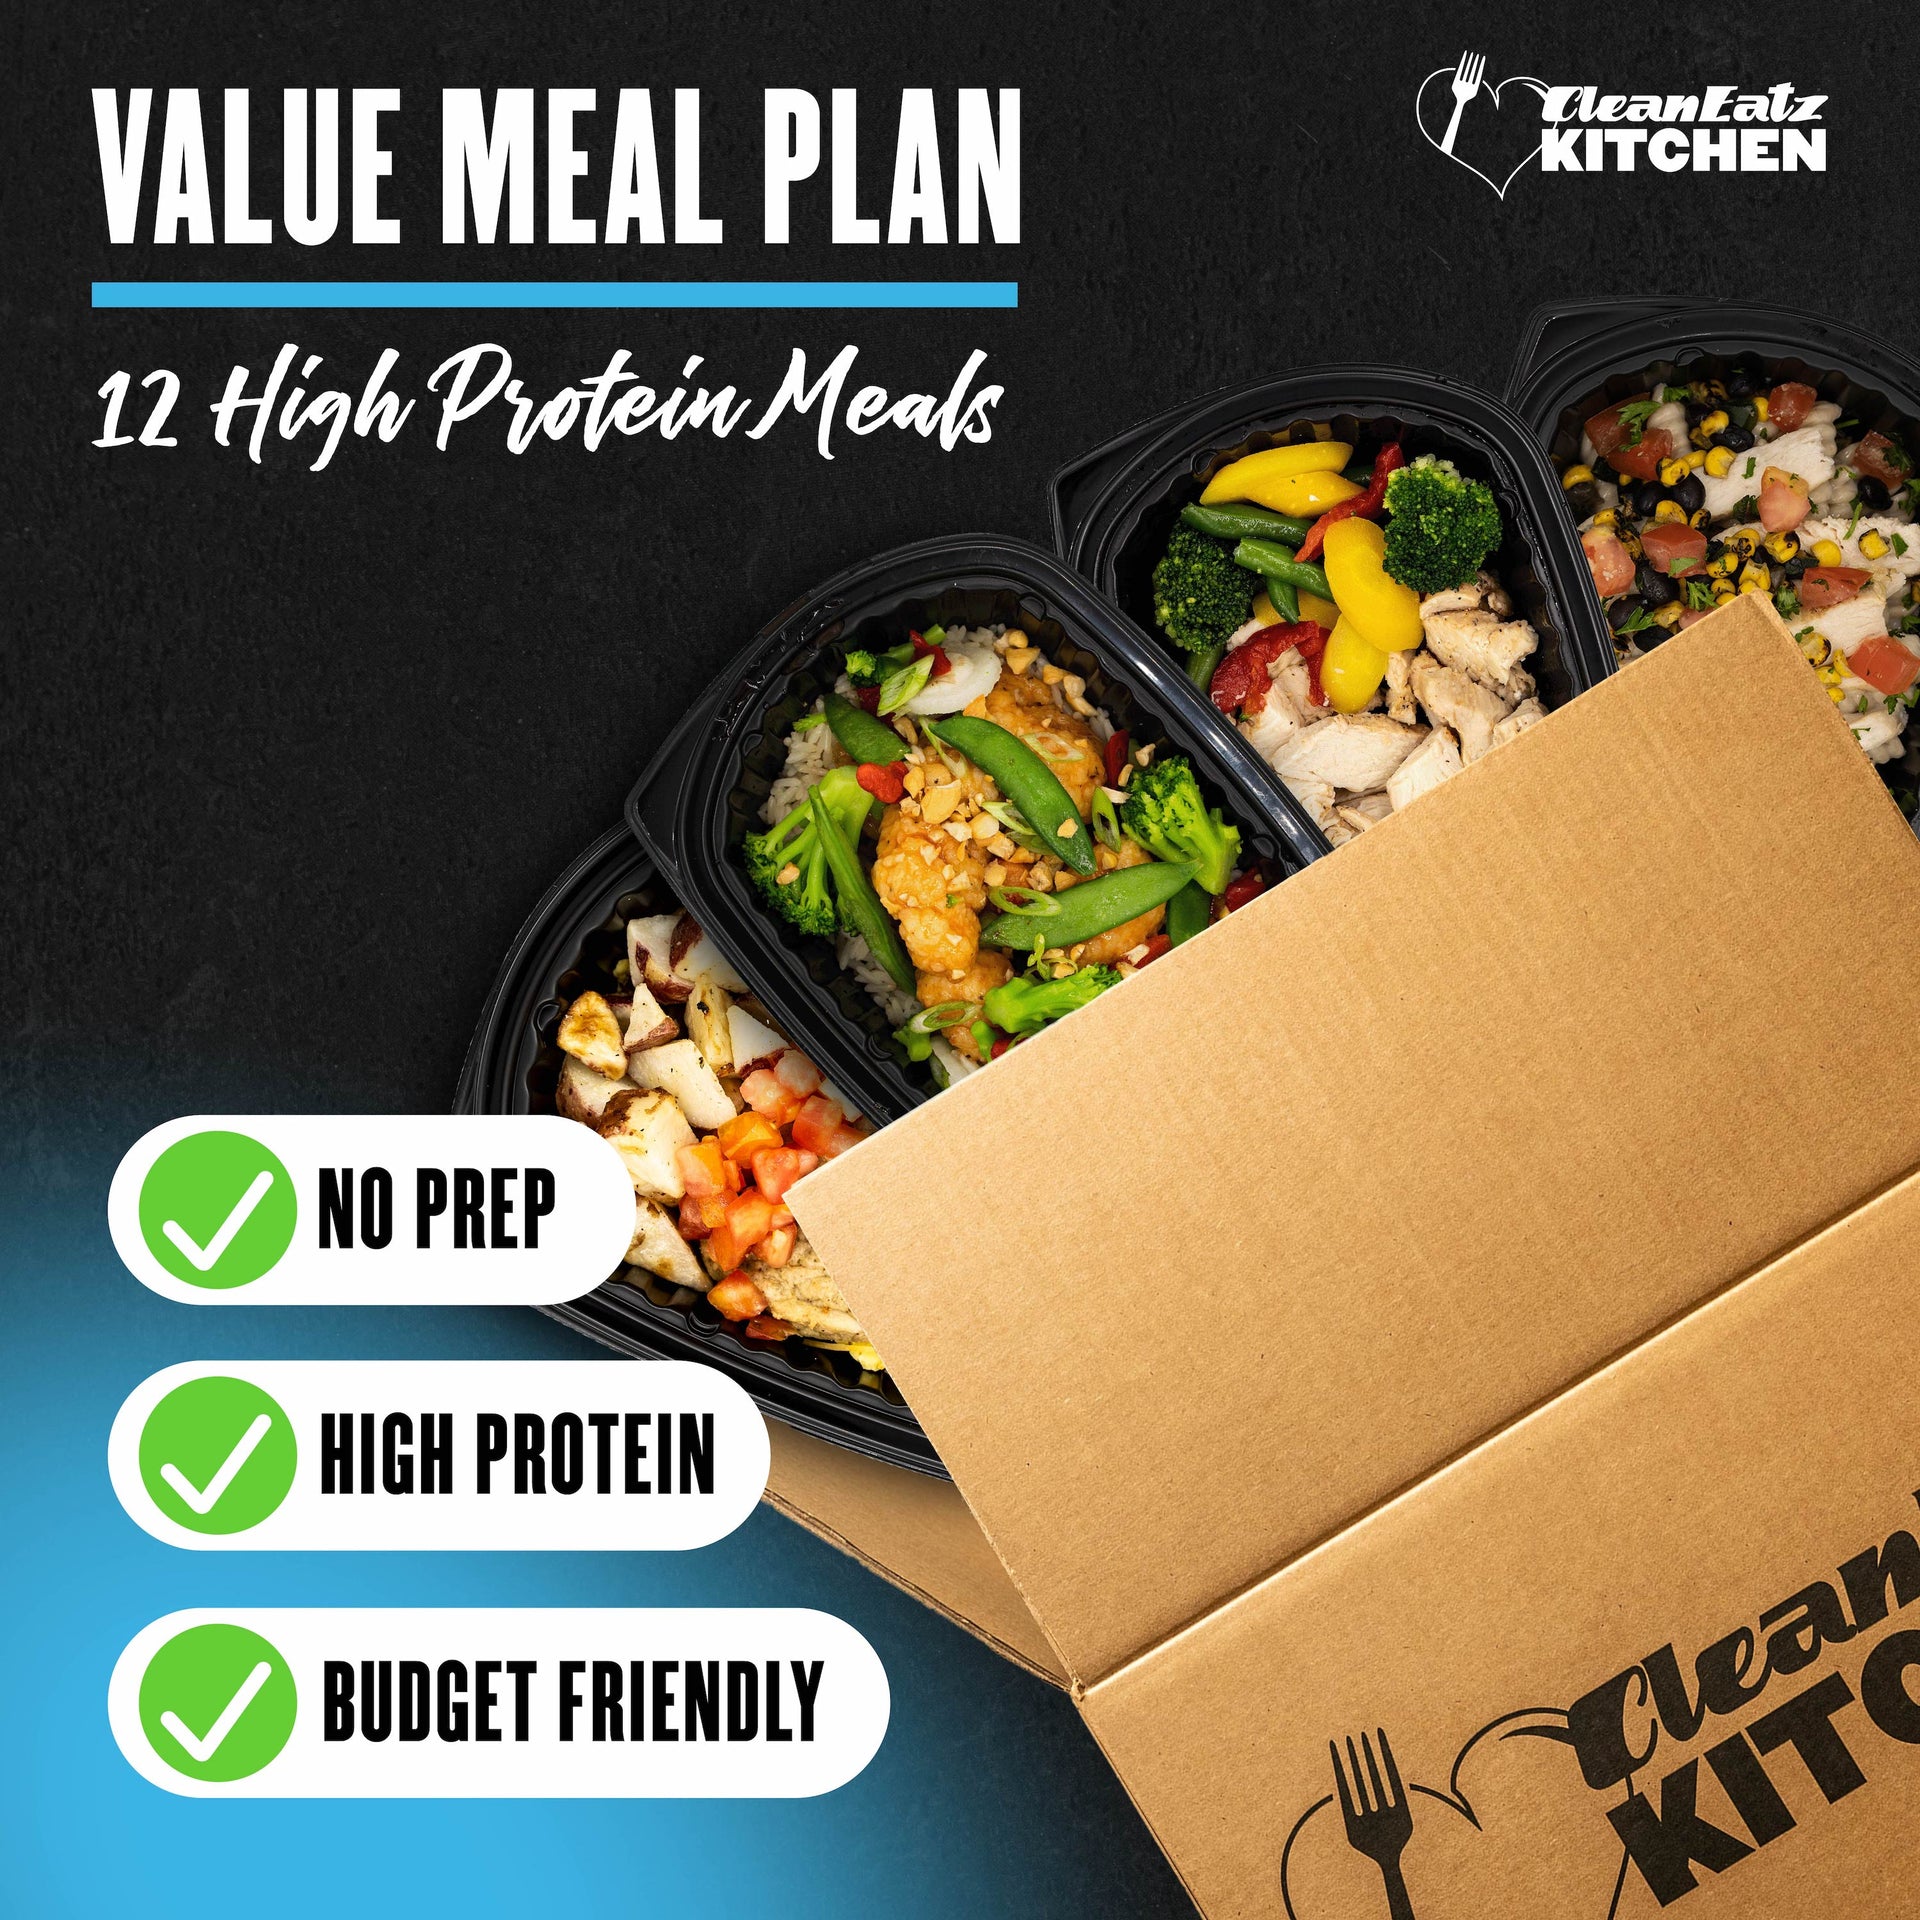 Affordable meal packages